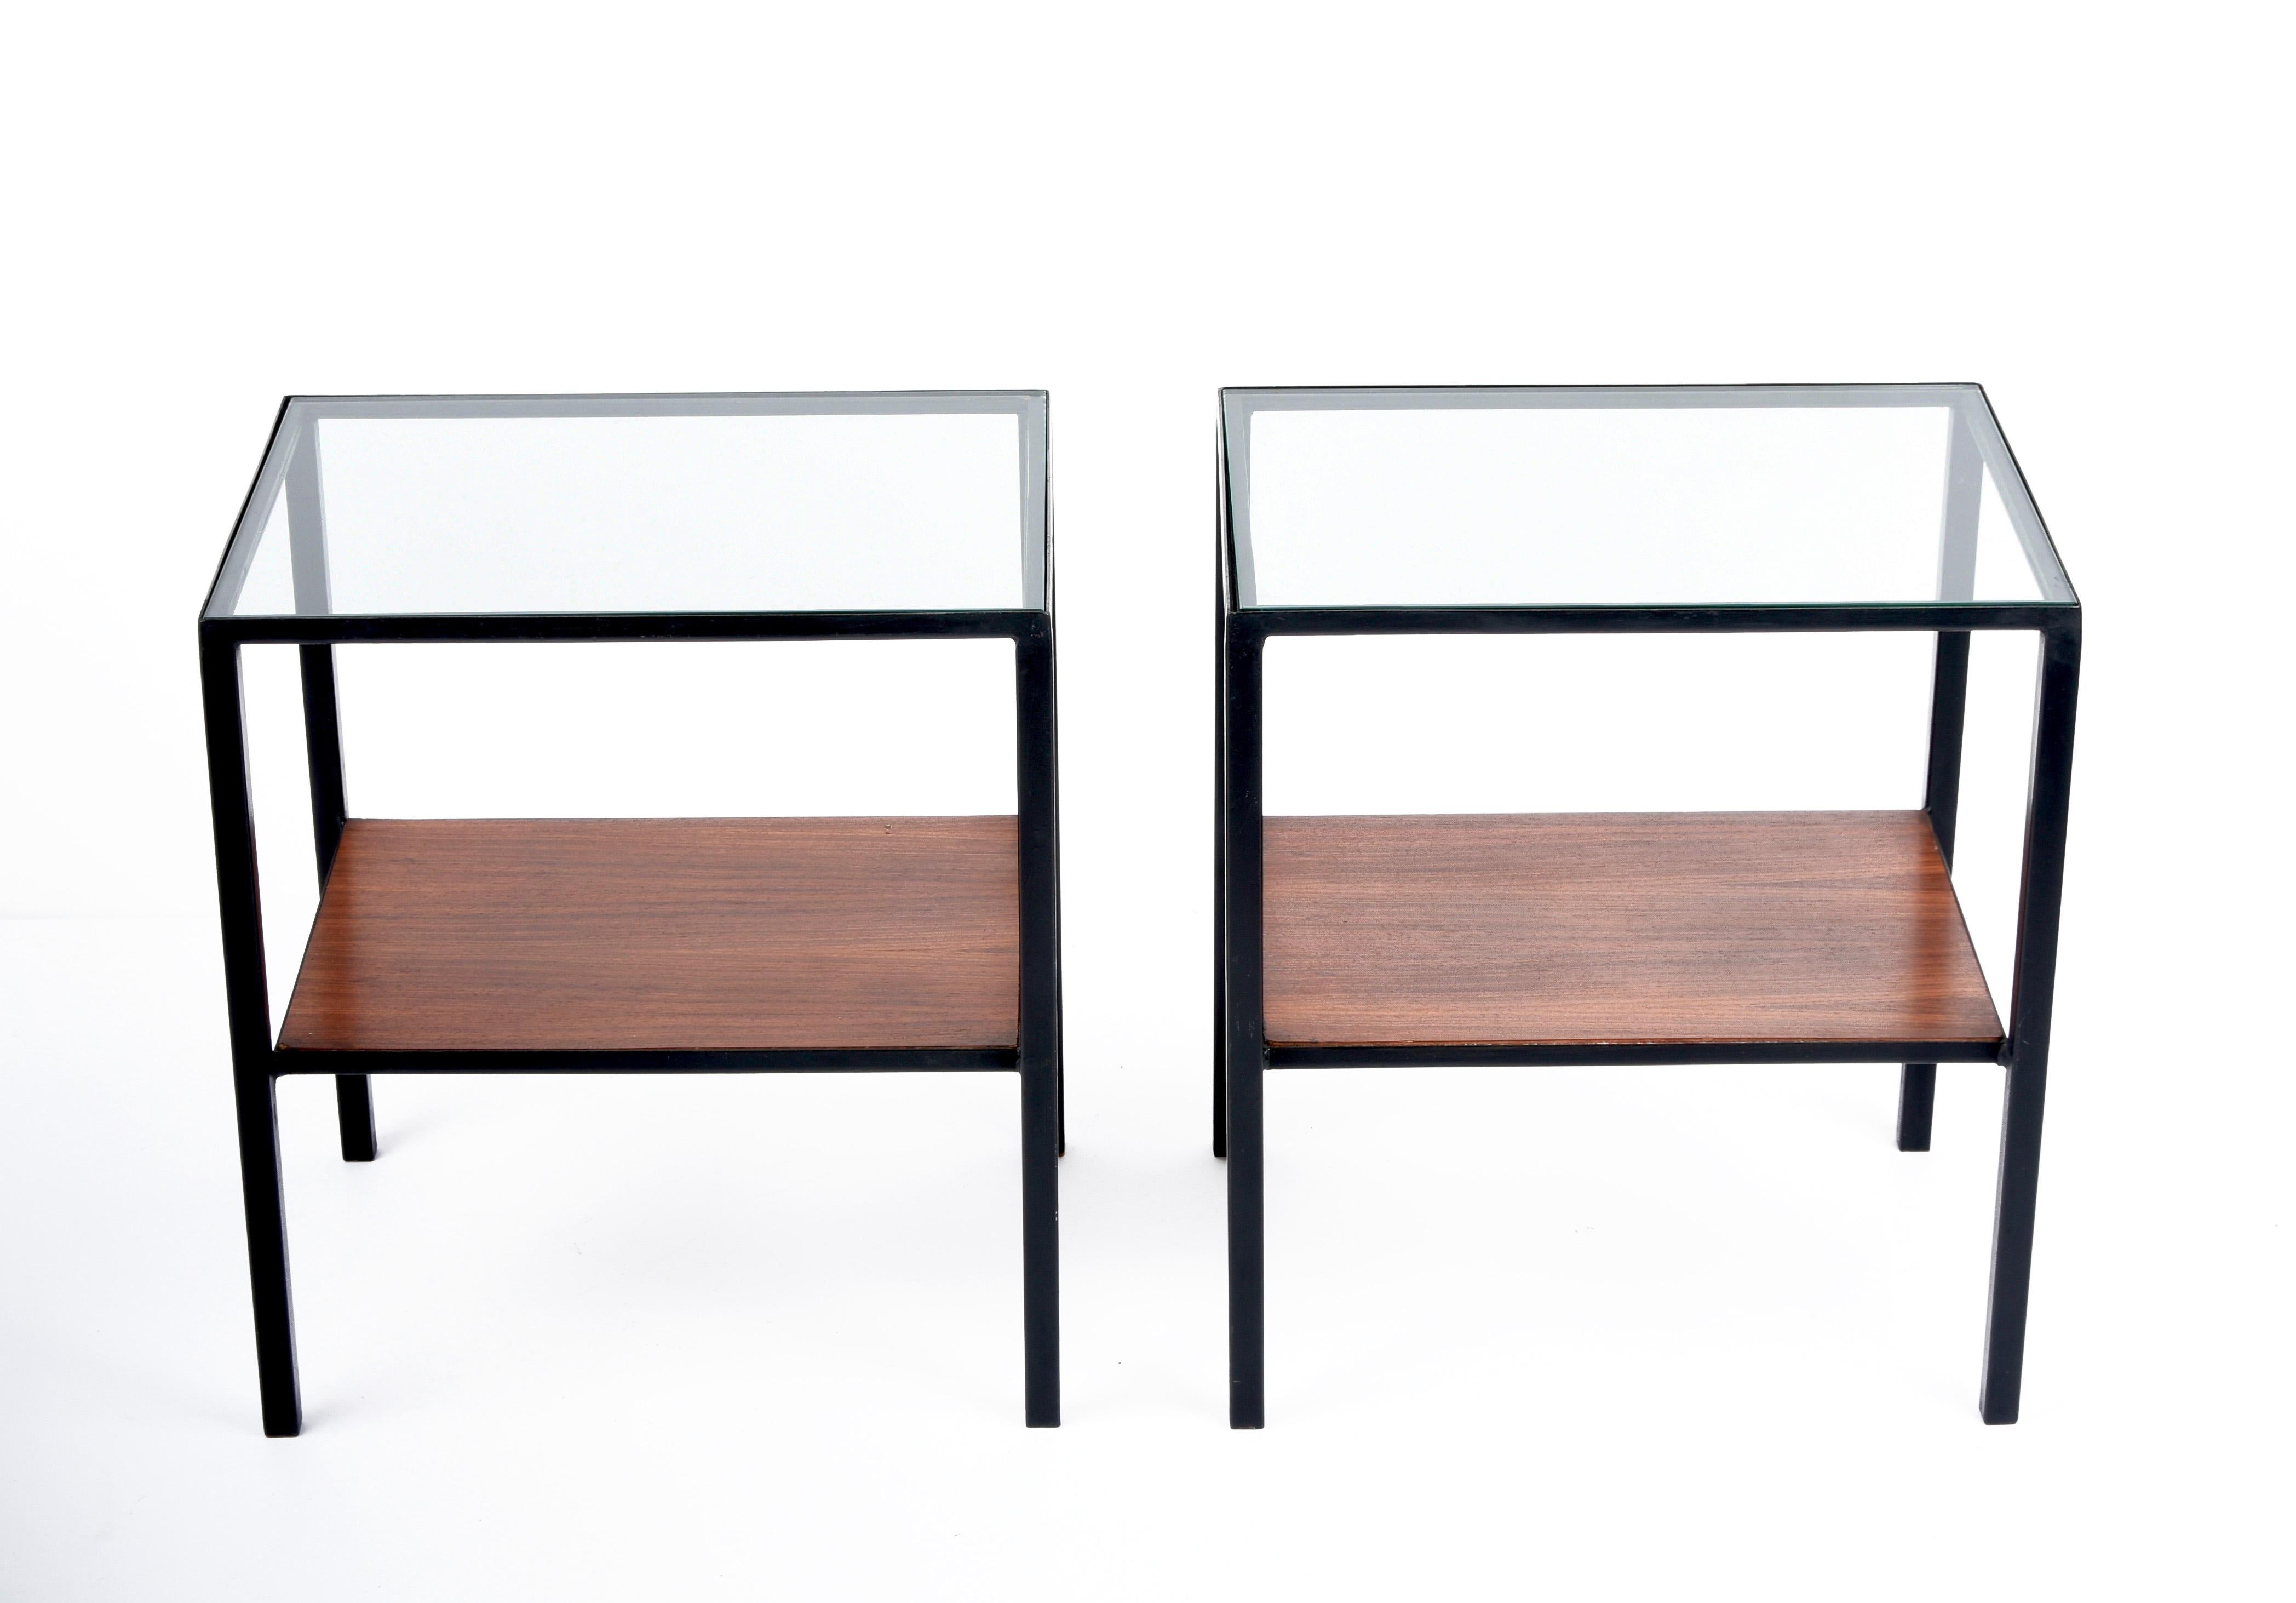 Amazing pair of midcentury two-level coffee tables, one glass top shelf and one wooden shelf. These fantastic side tables were designed in Italy during the 1960s.

Amazing pieces with straight lines and a clean and pure structure in black